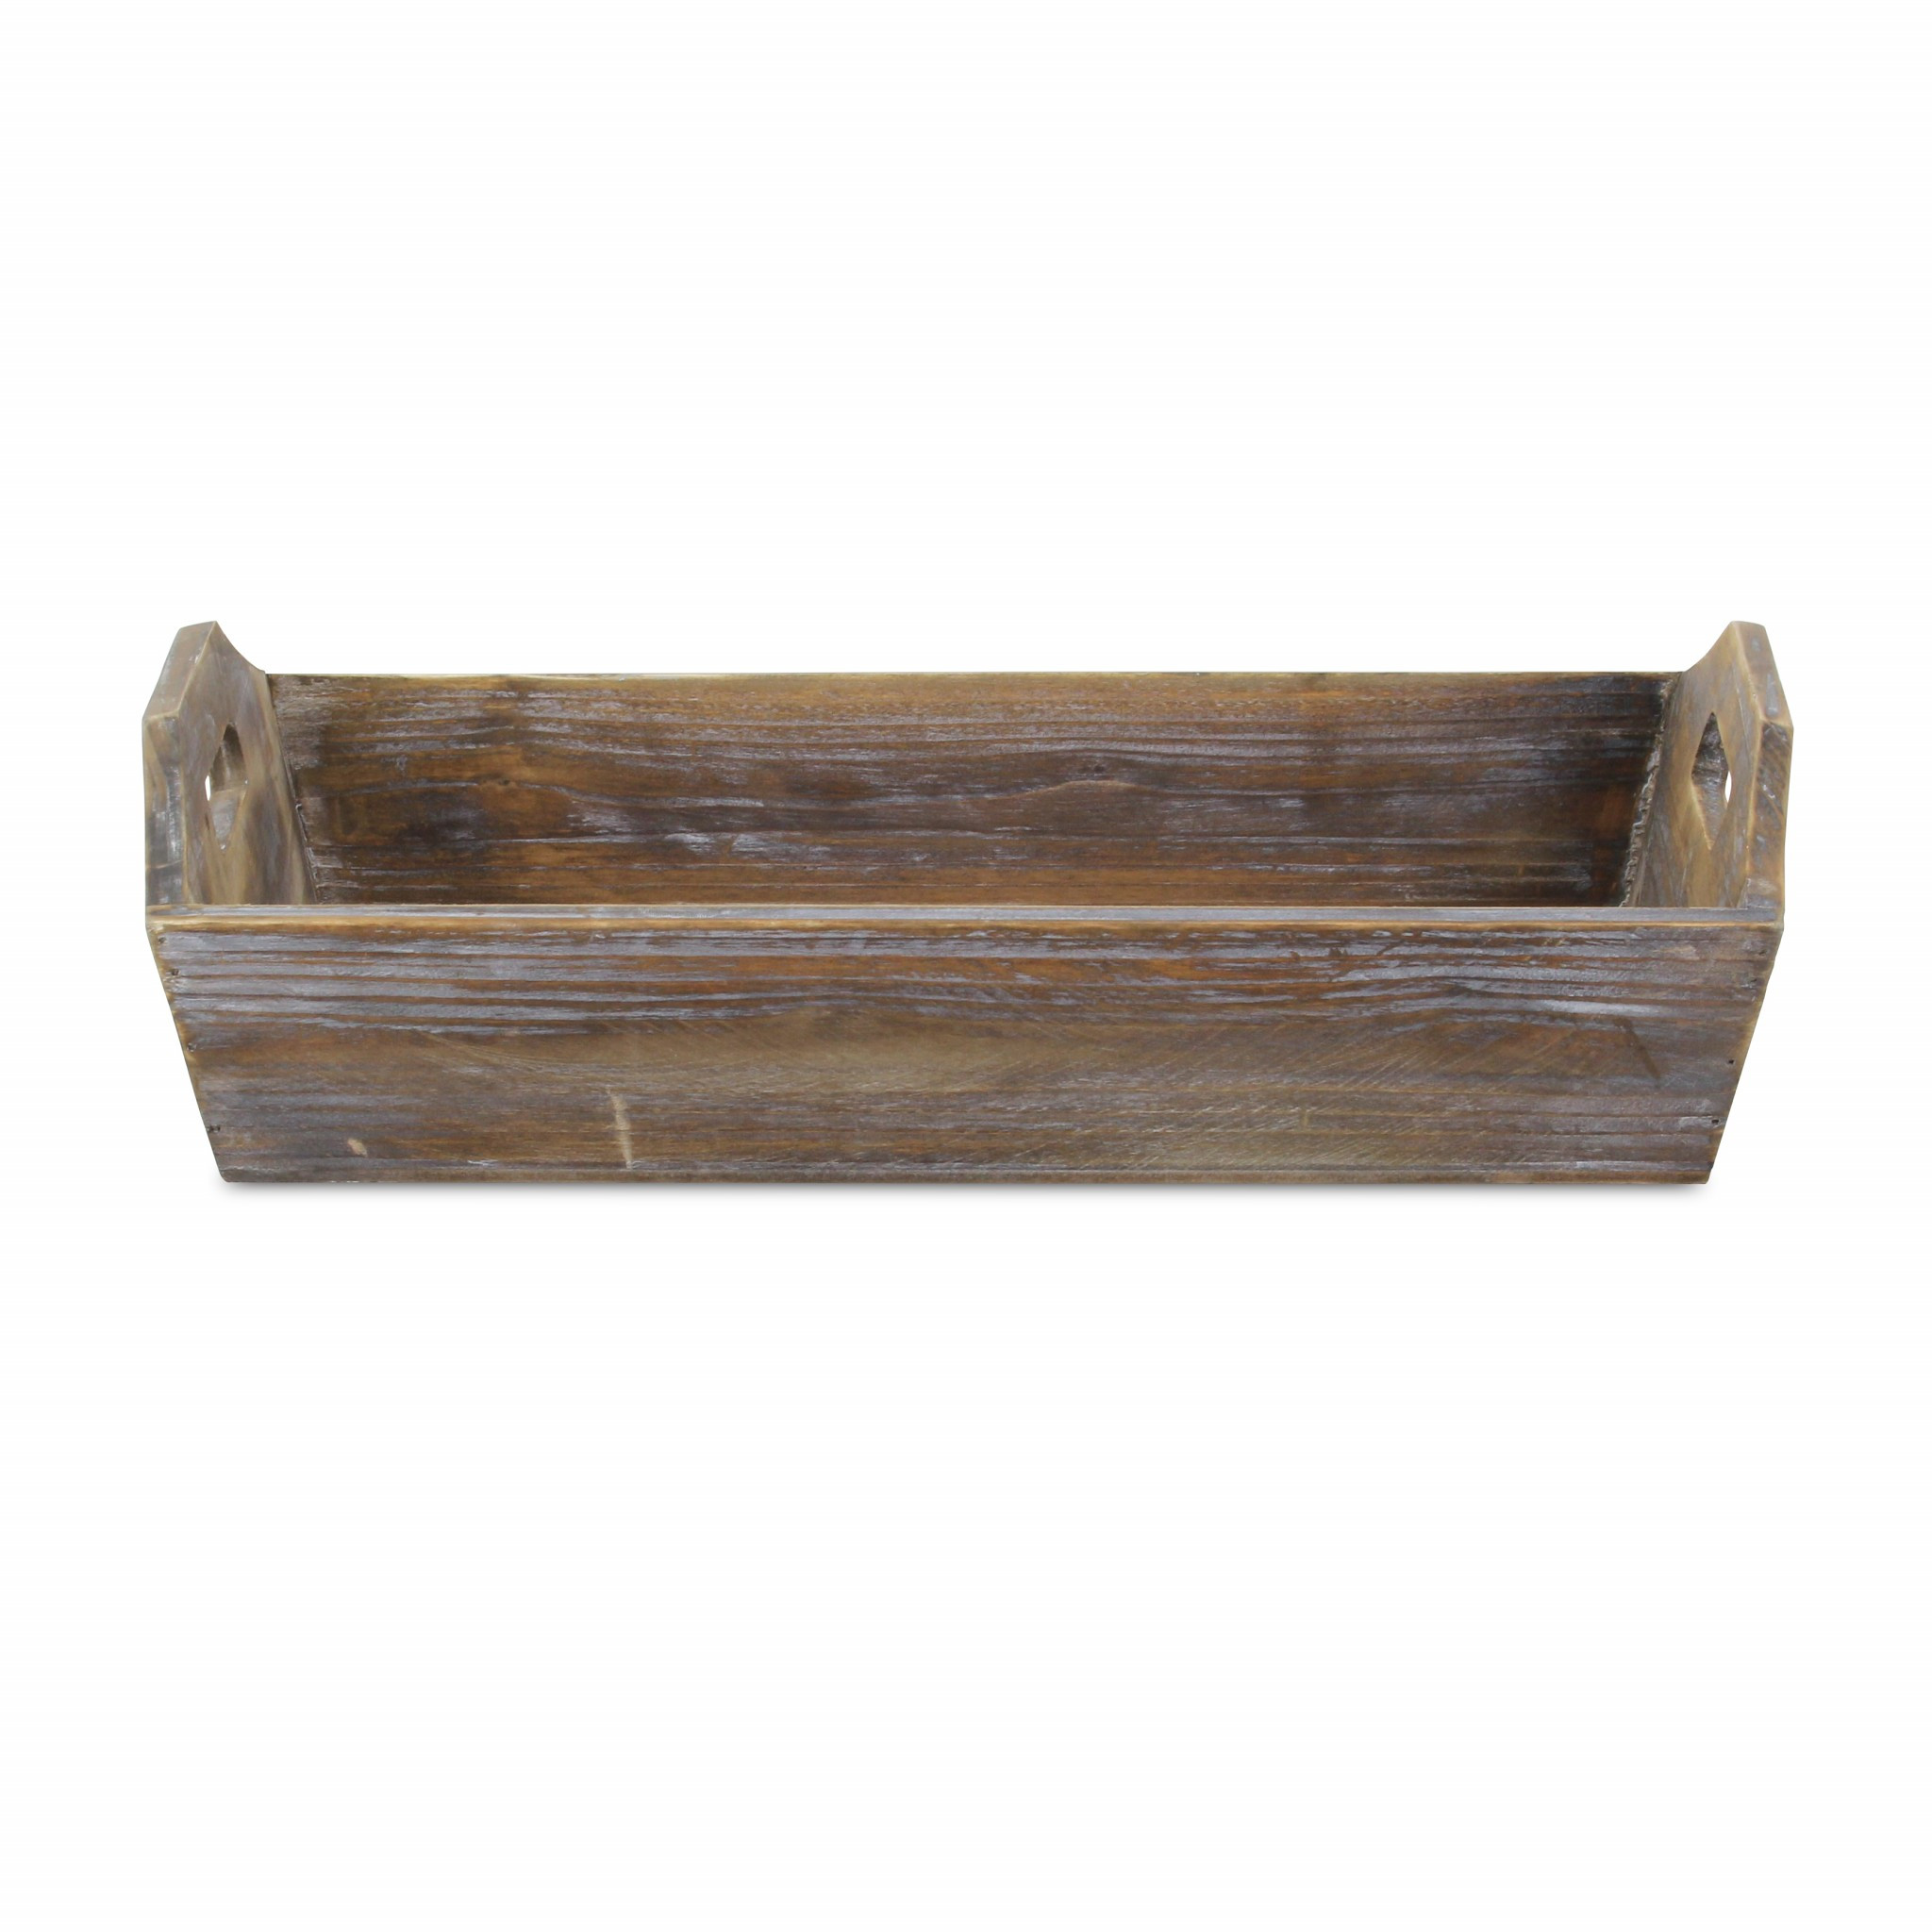 Rectangular Dark Rustic Brown Finish Wood Serving Tray with Handles